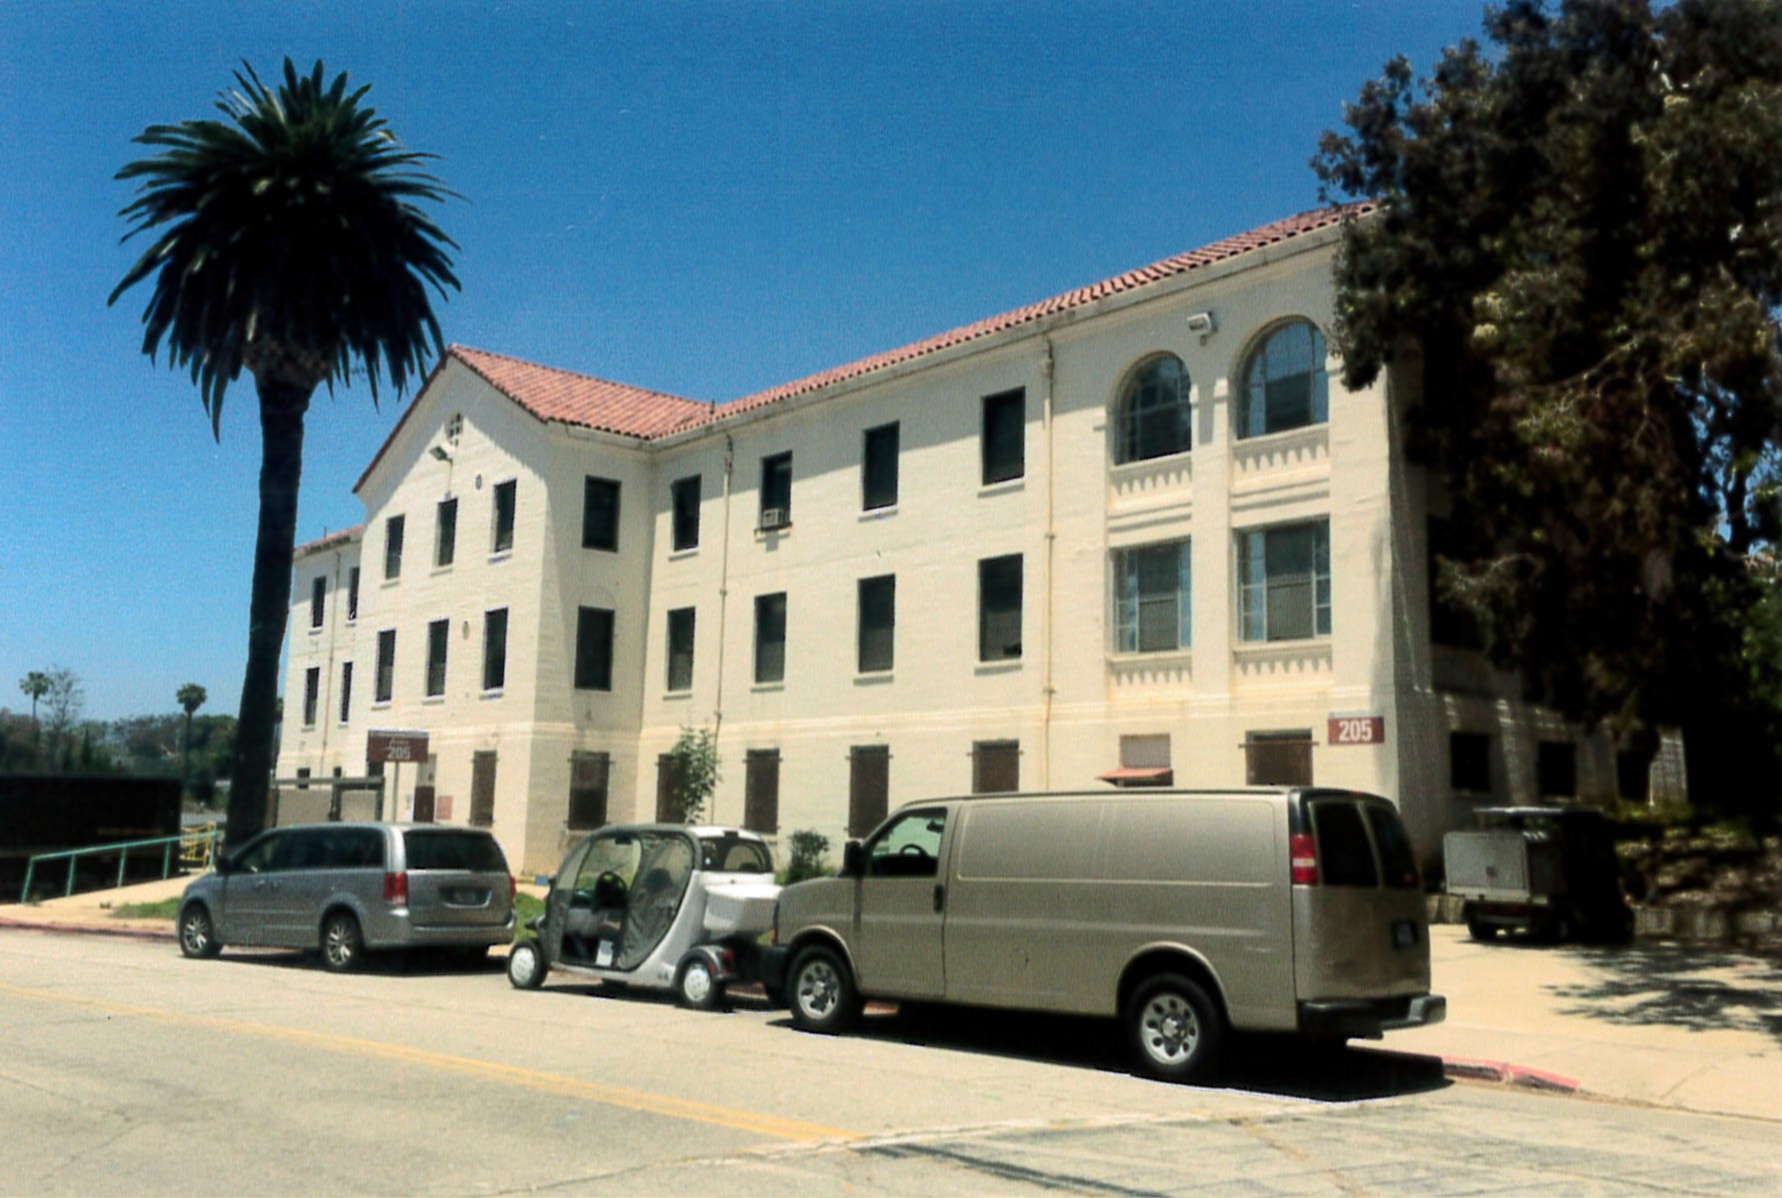 South view of Building 205